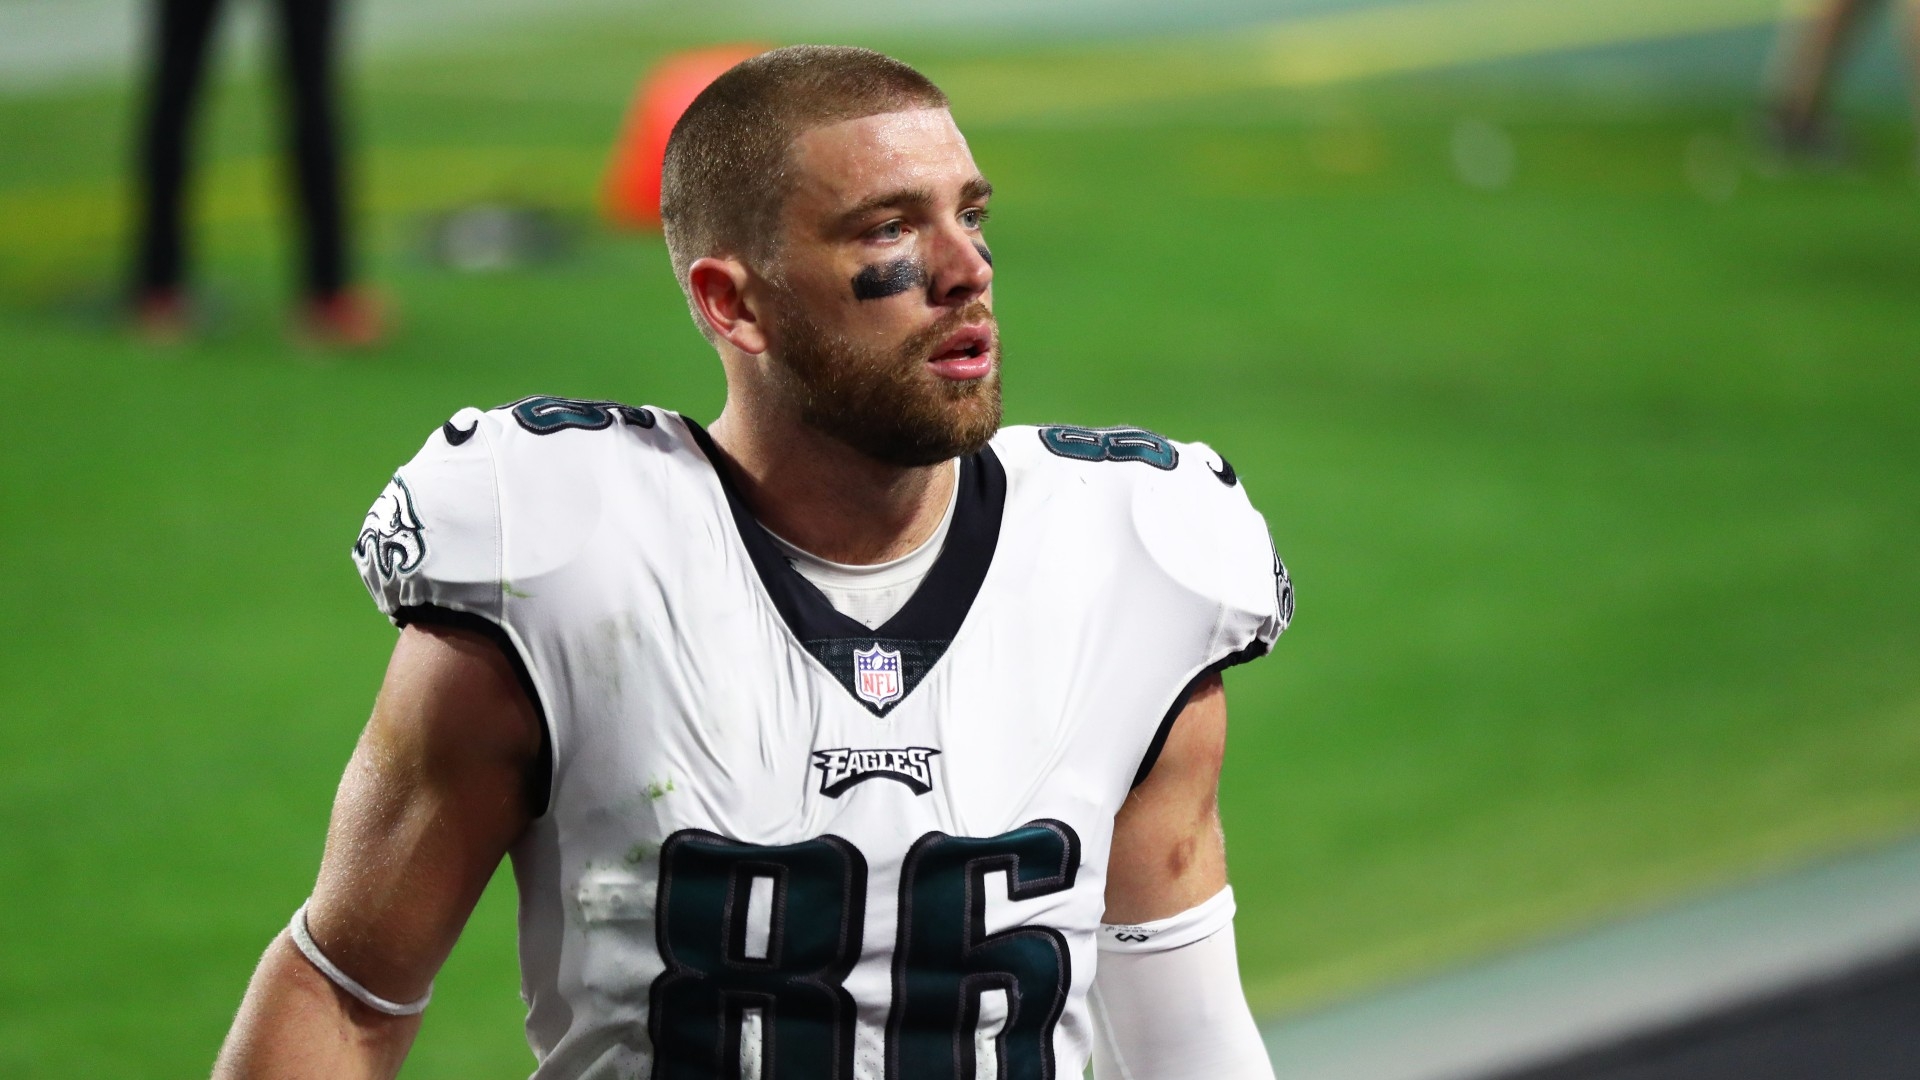 Why Zach Ertz could ‘certainly’ fit into Washington’s offensive plan